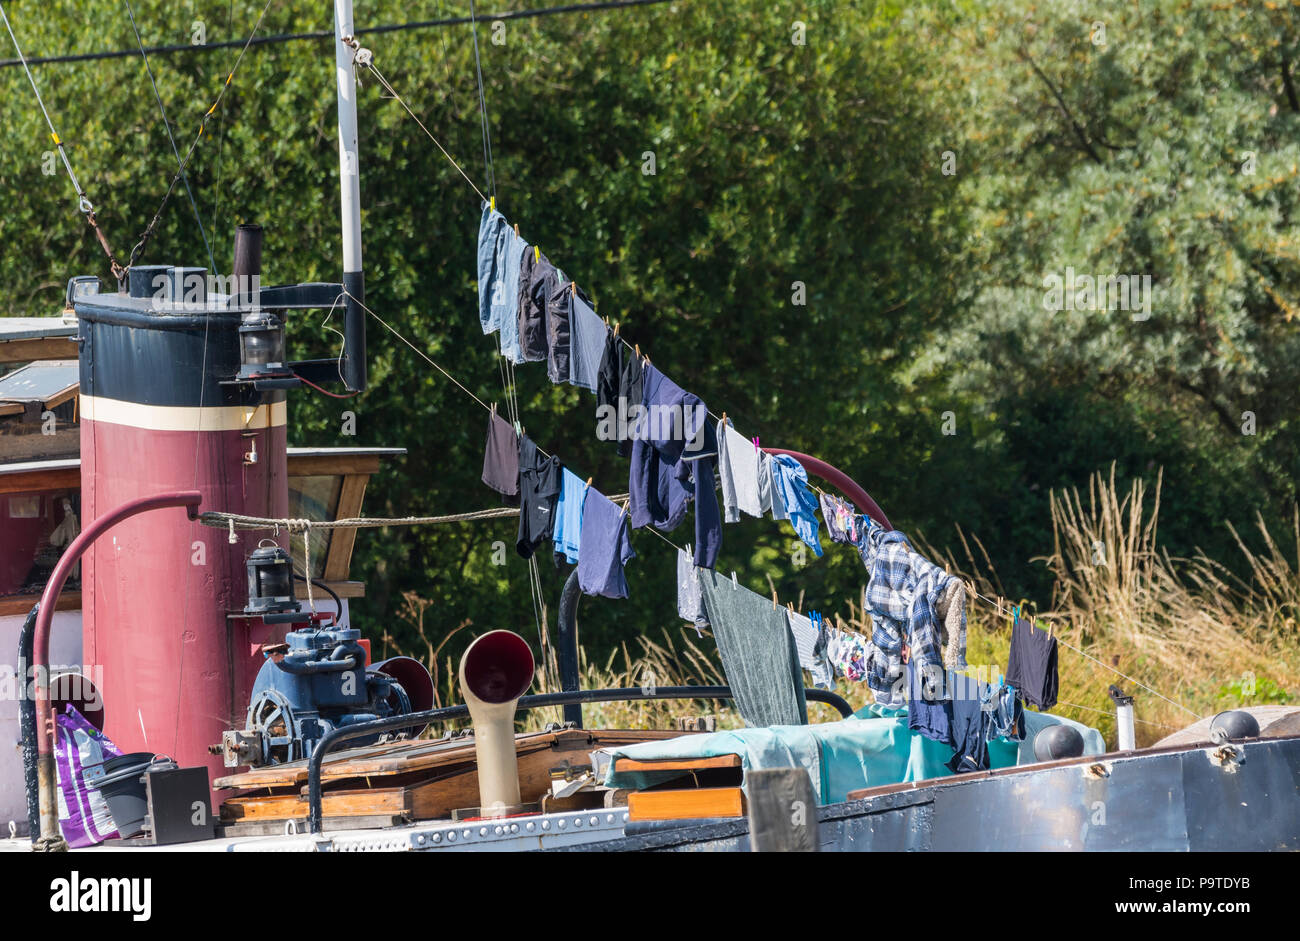 Washing hanging up on a line to dry, on a houseboat, in hot weather in Summer in the UK. Stock Photo